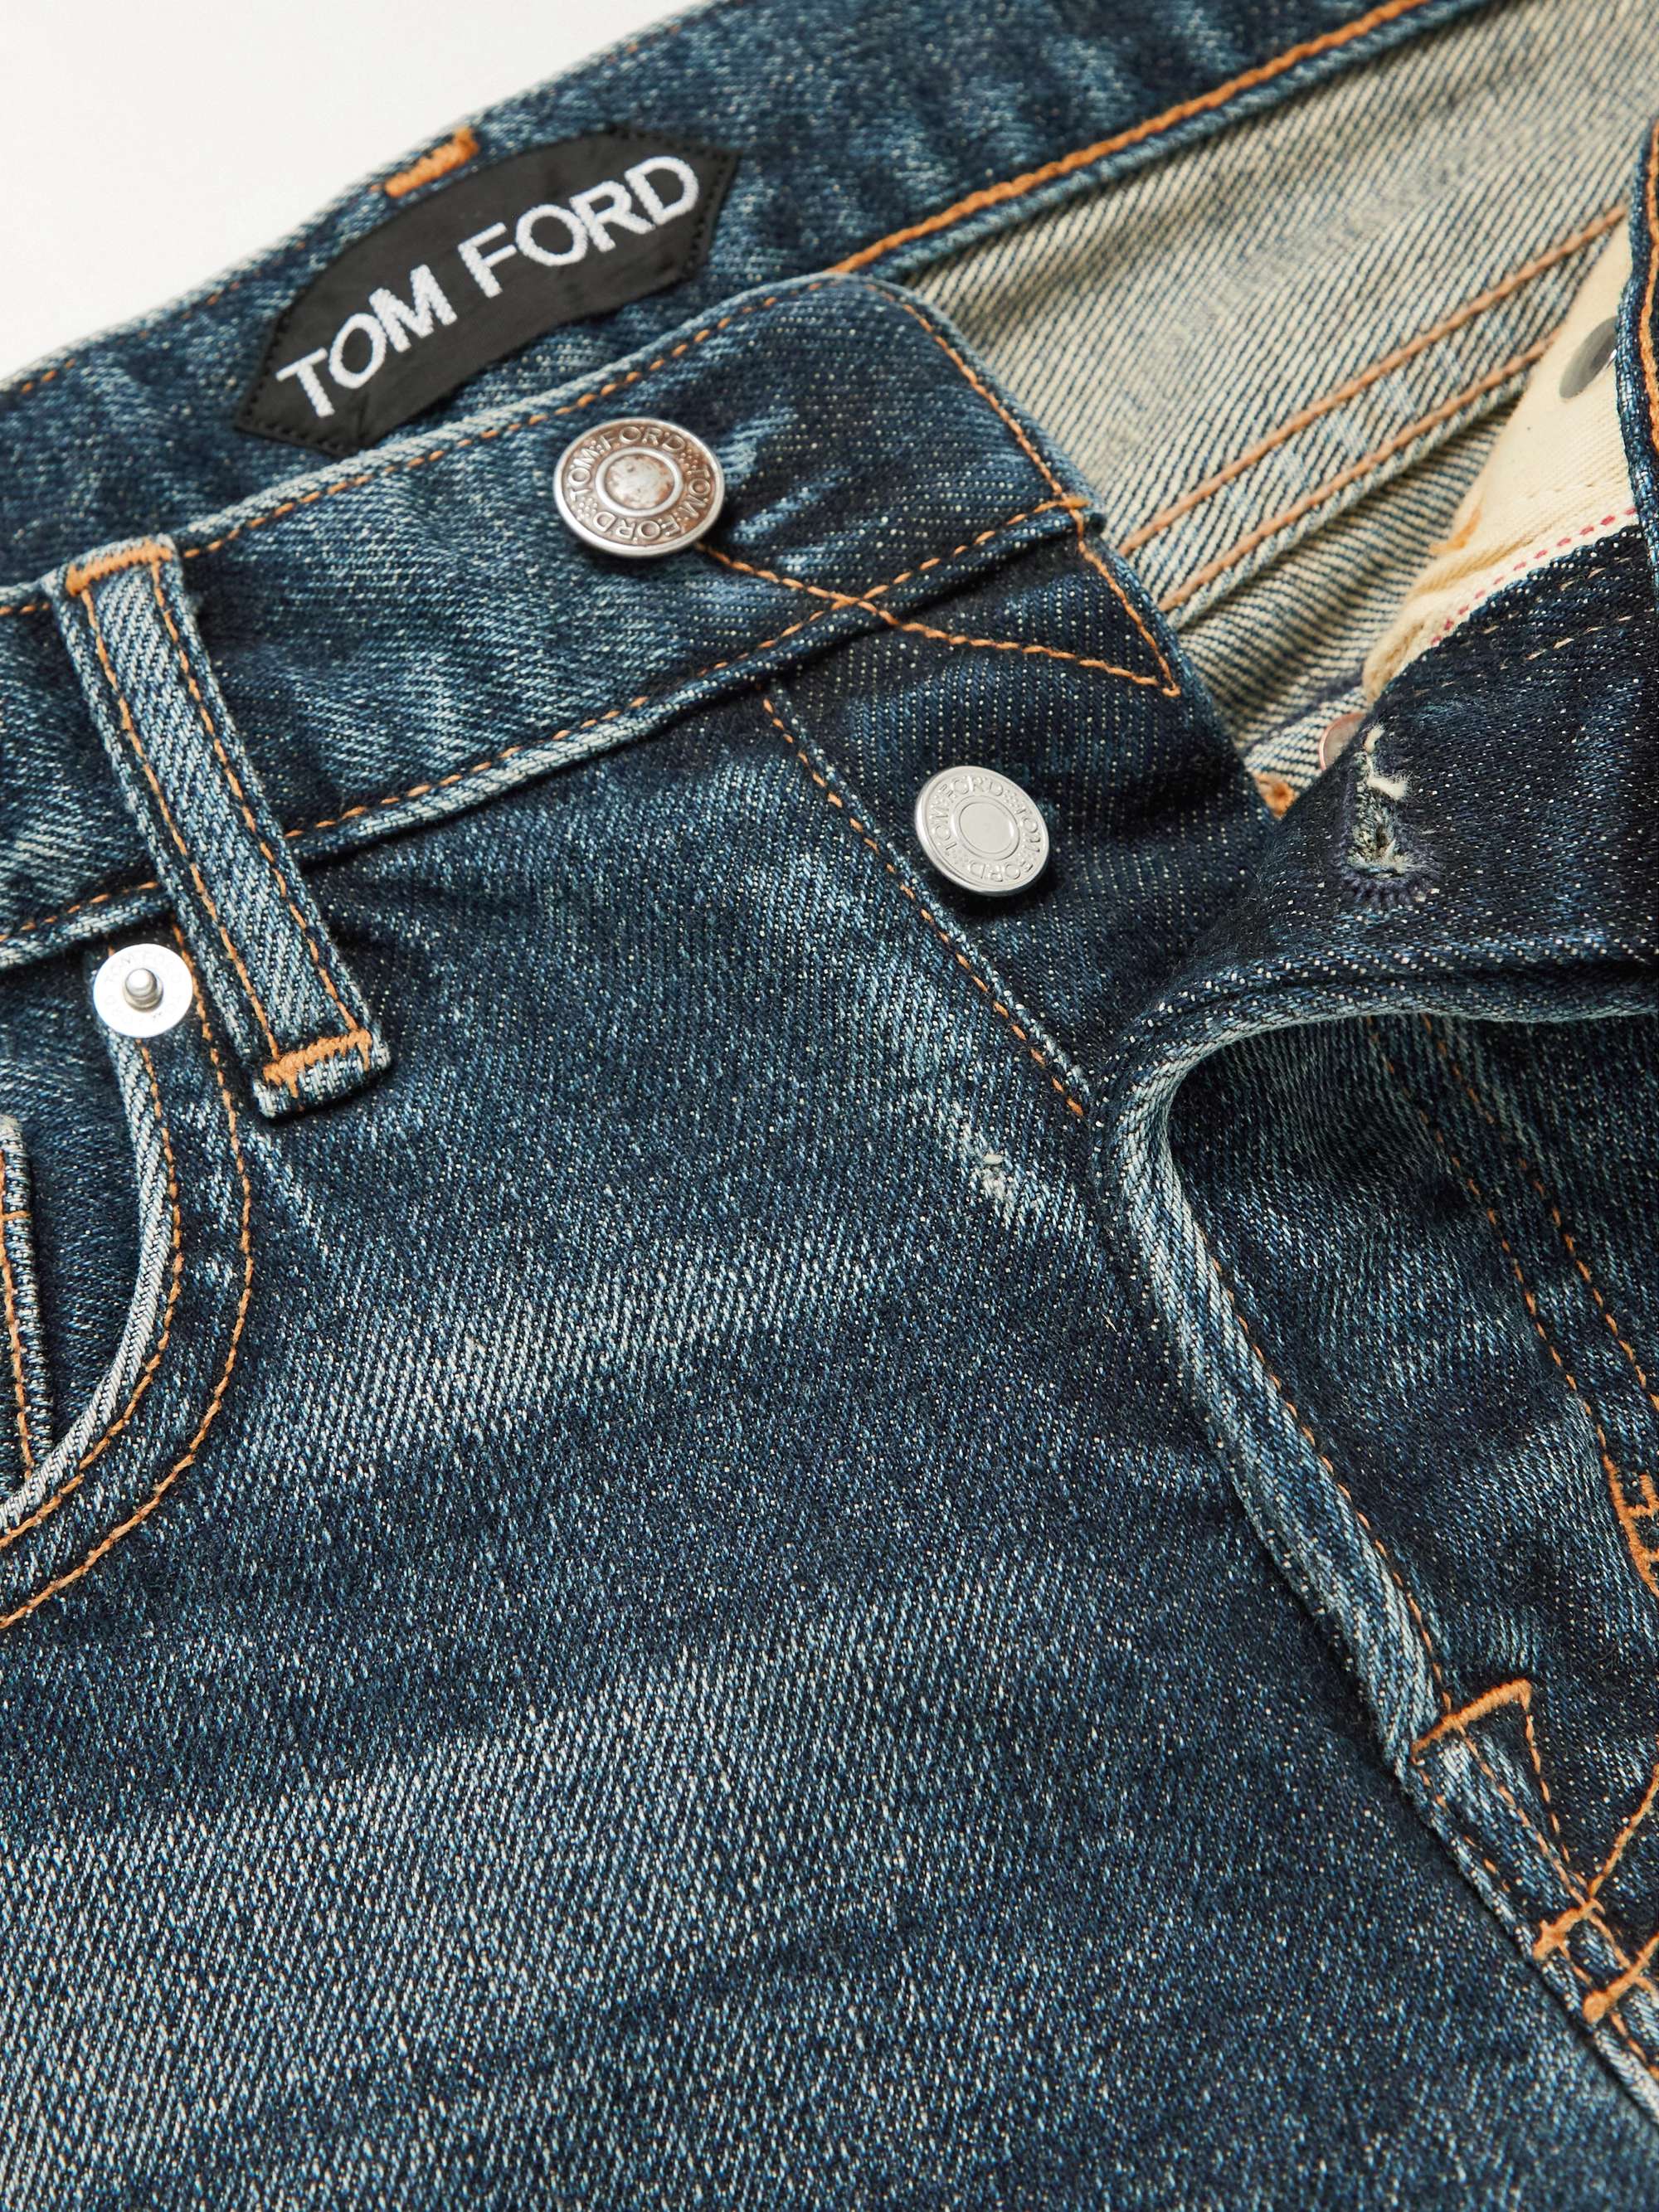 TOM FORD Skinny-Fit Selvedge Jeans